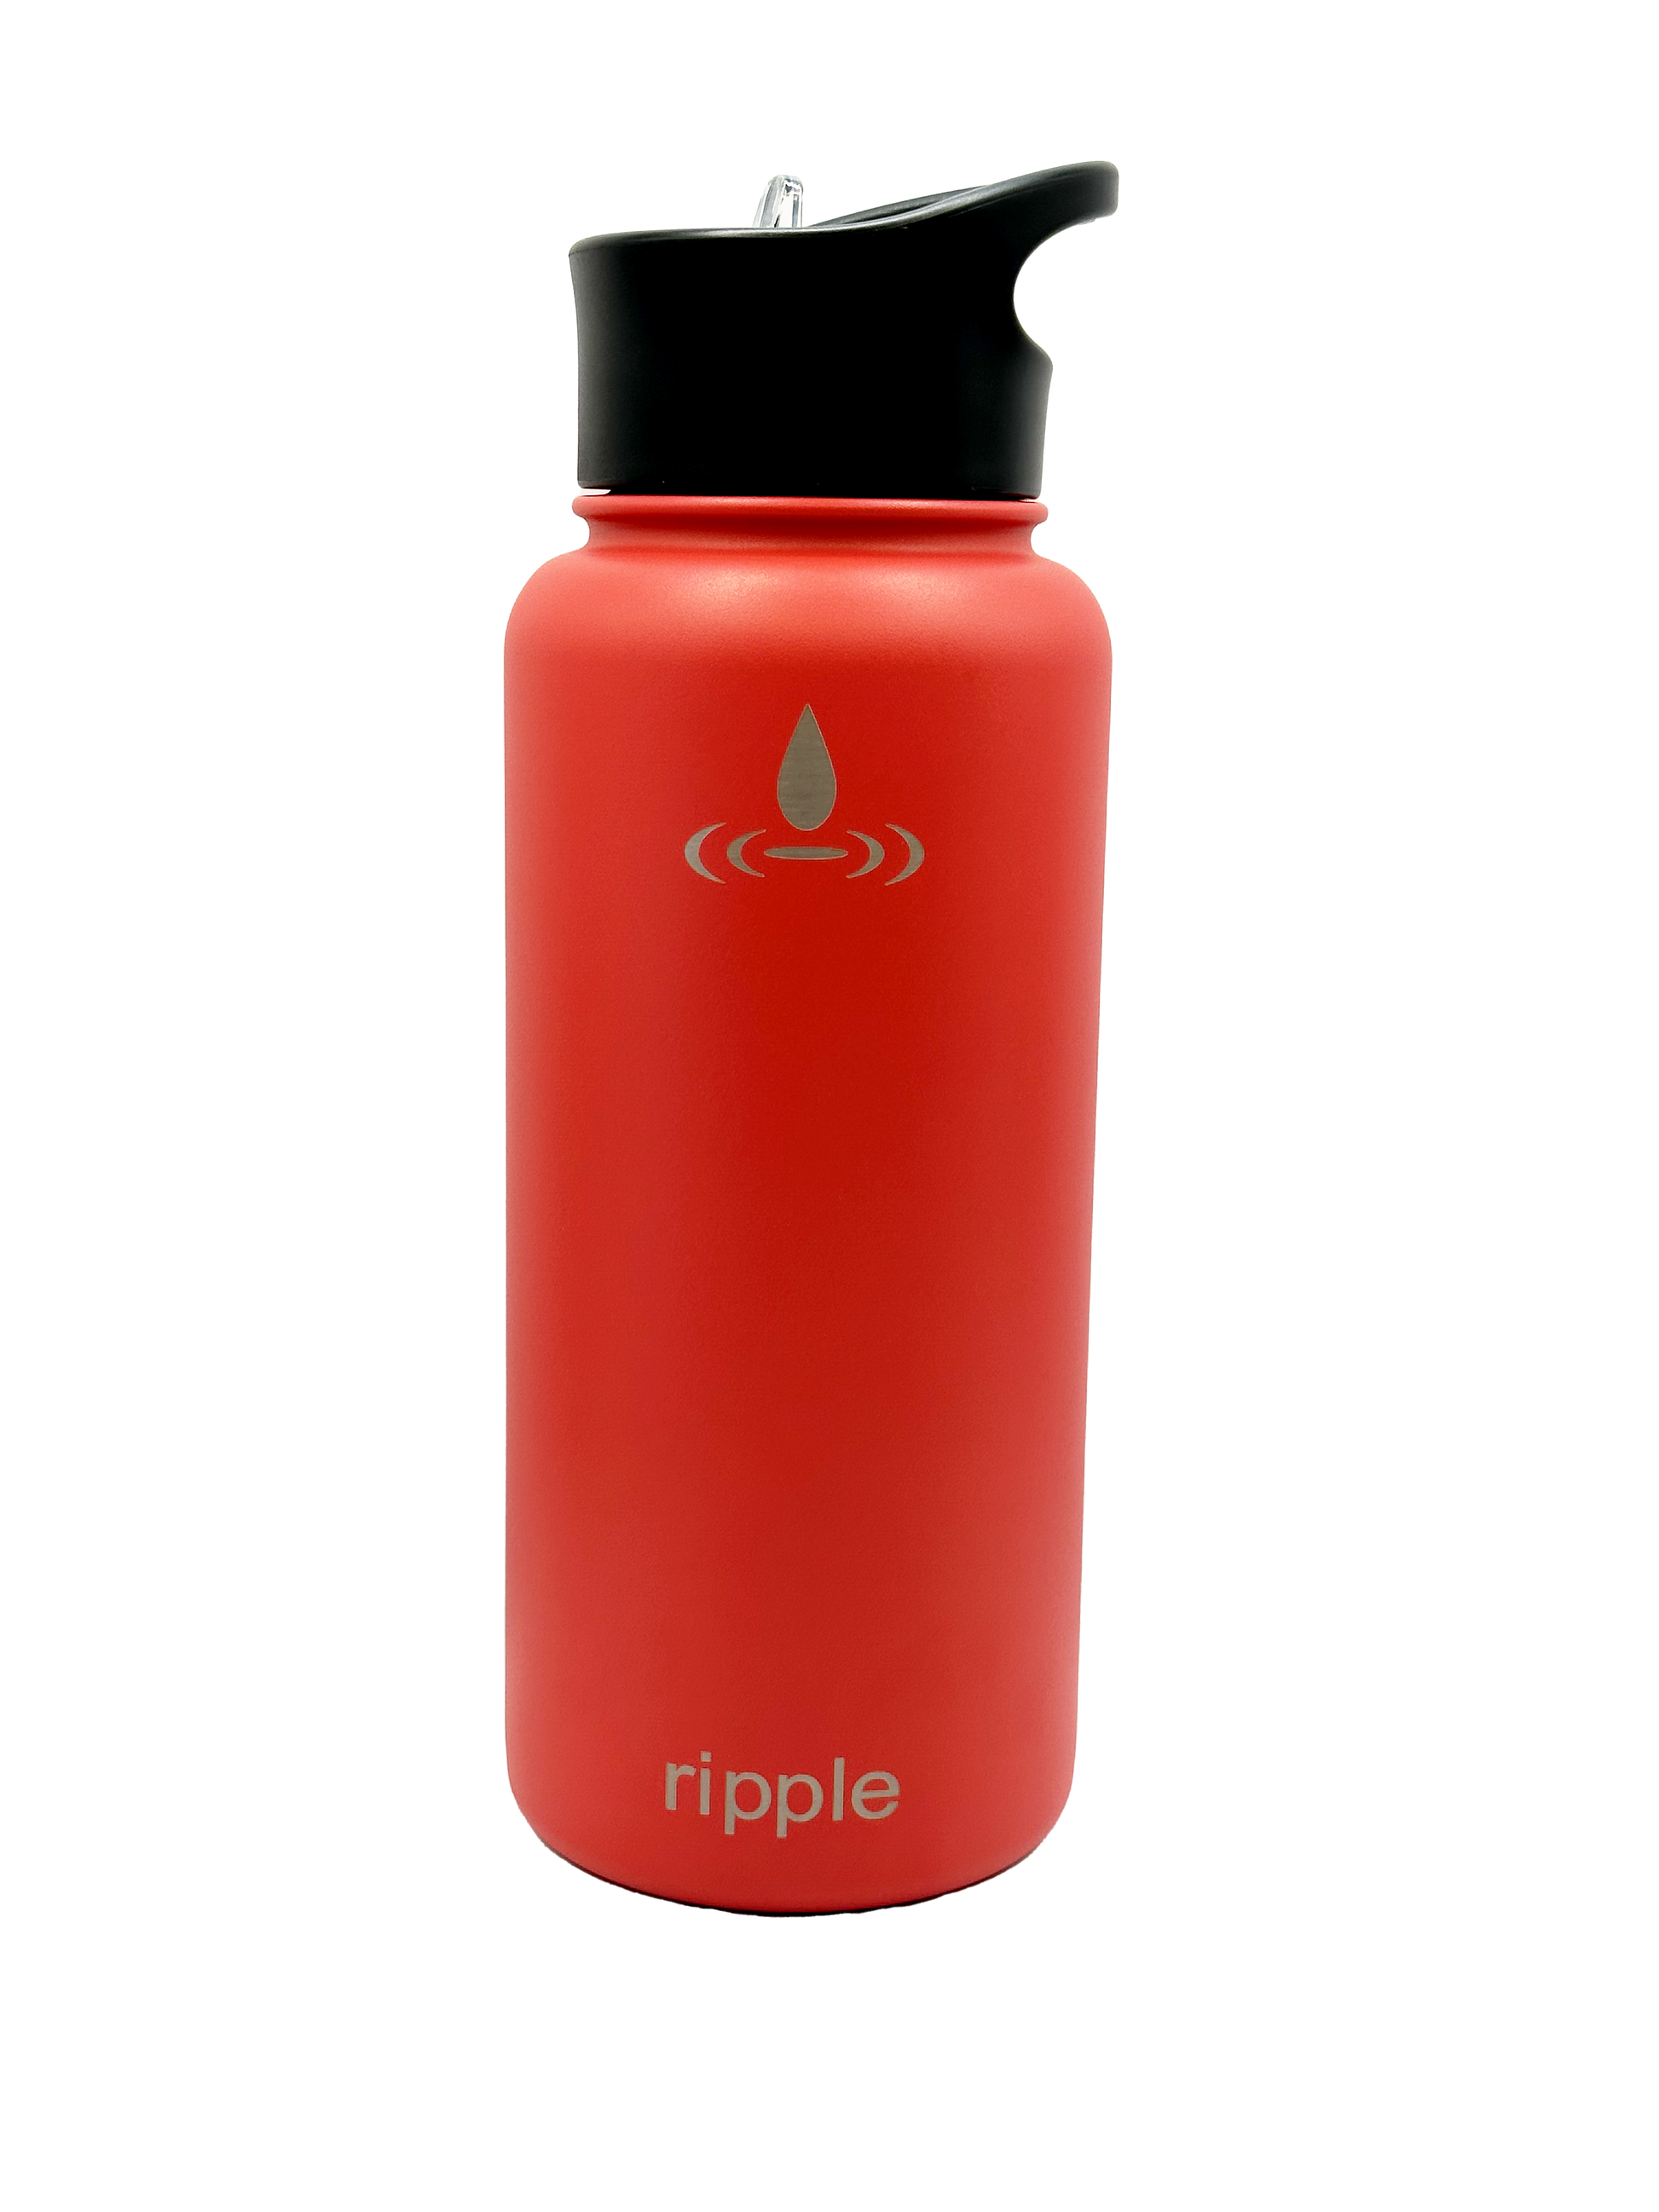 We Are The Ripple Water Bottles